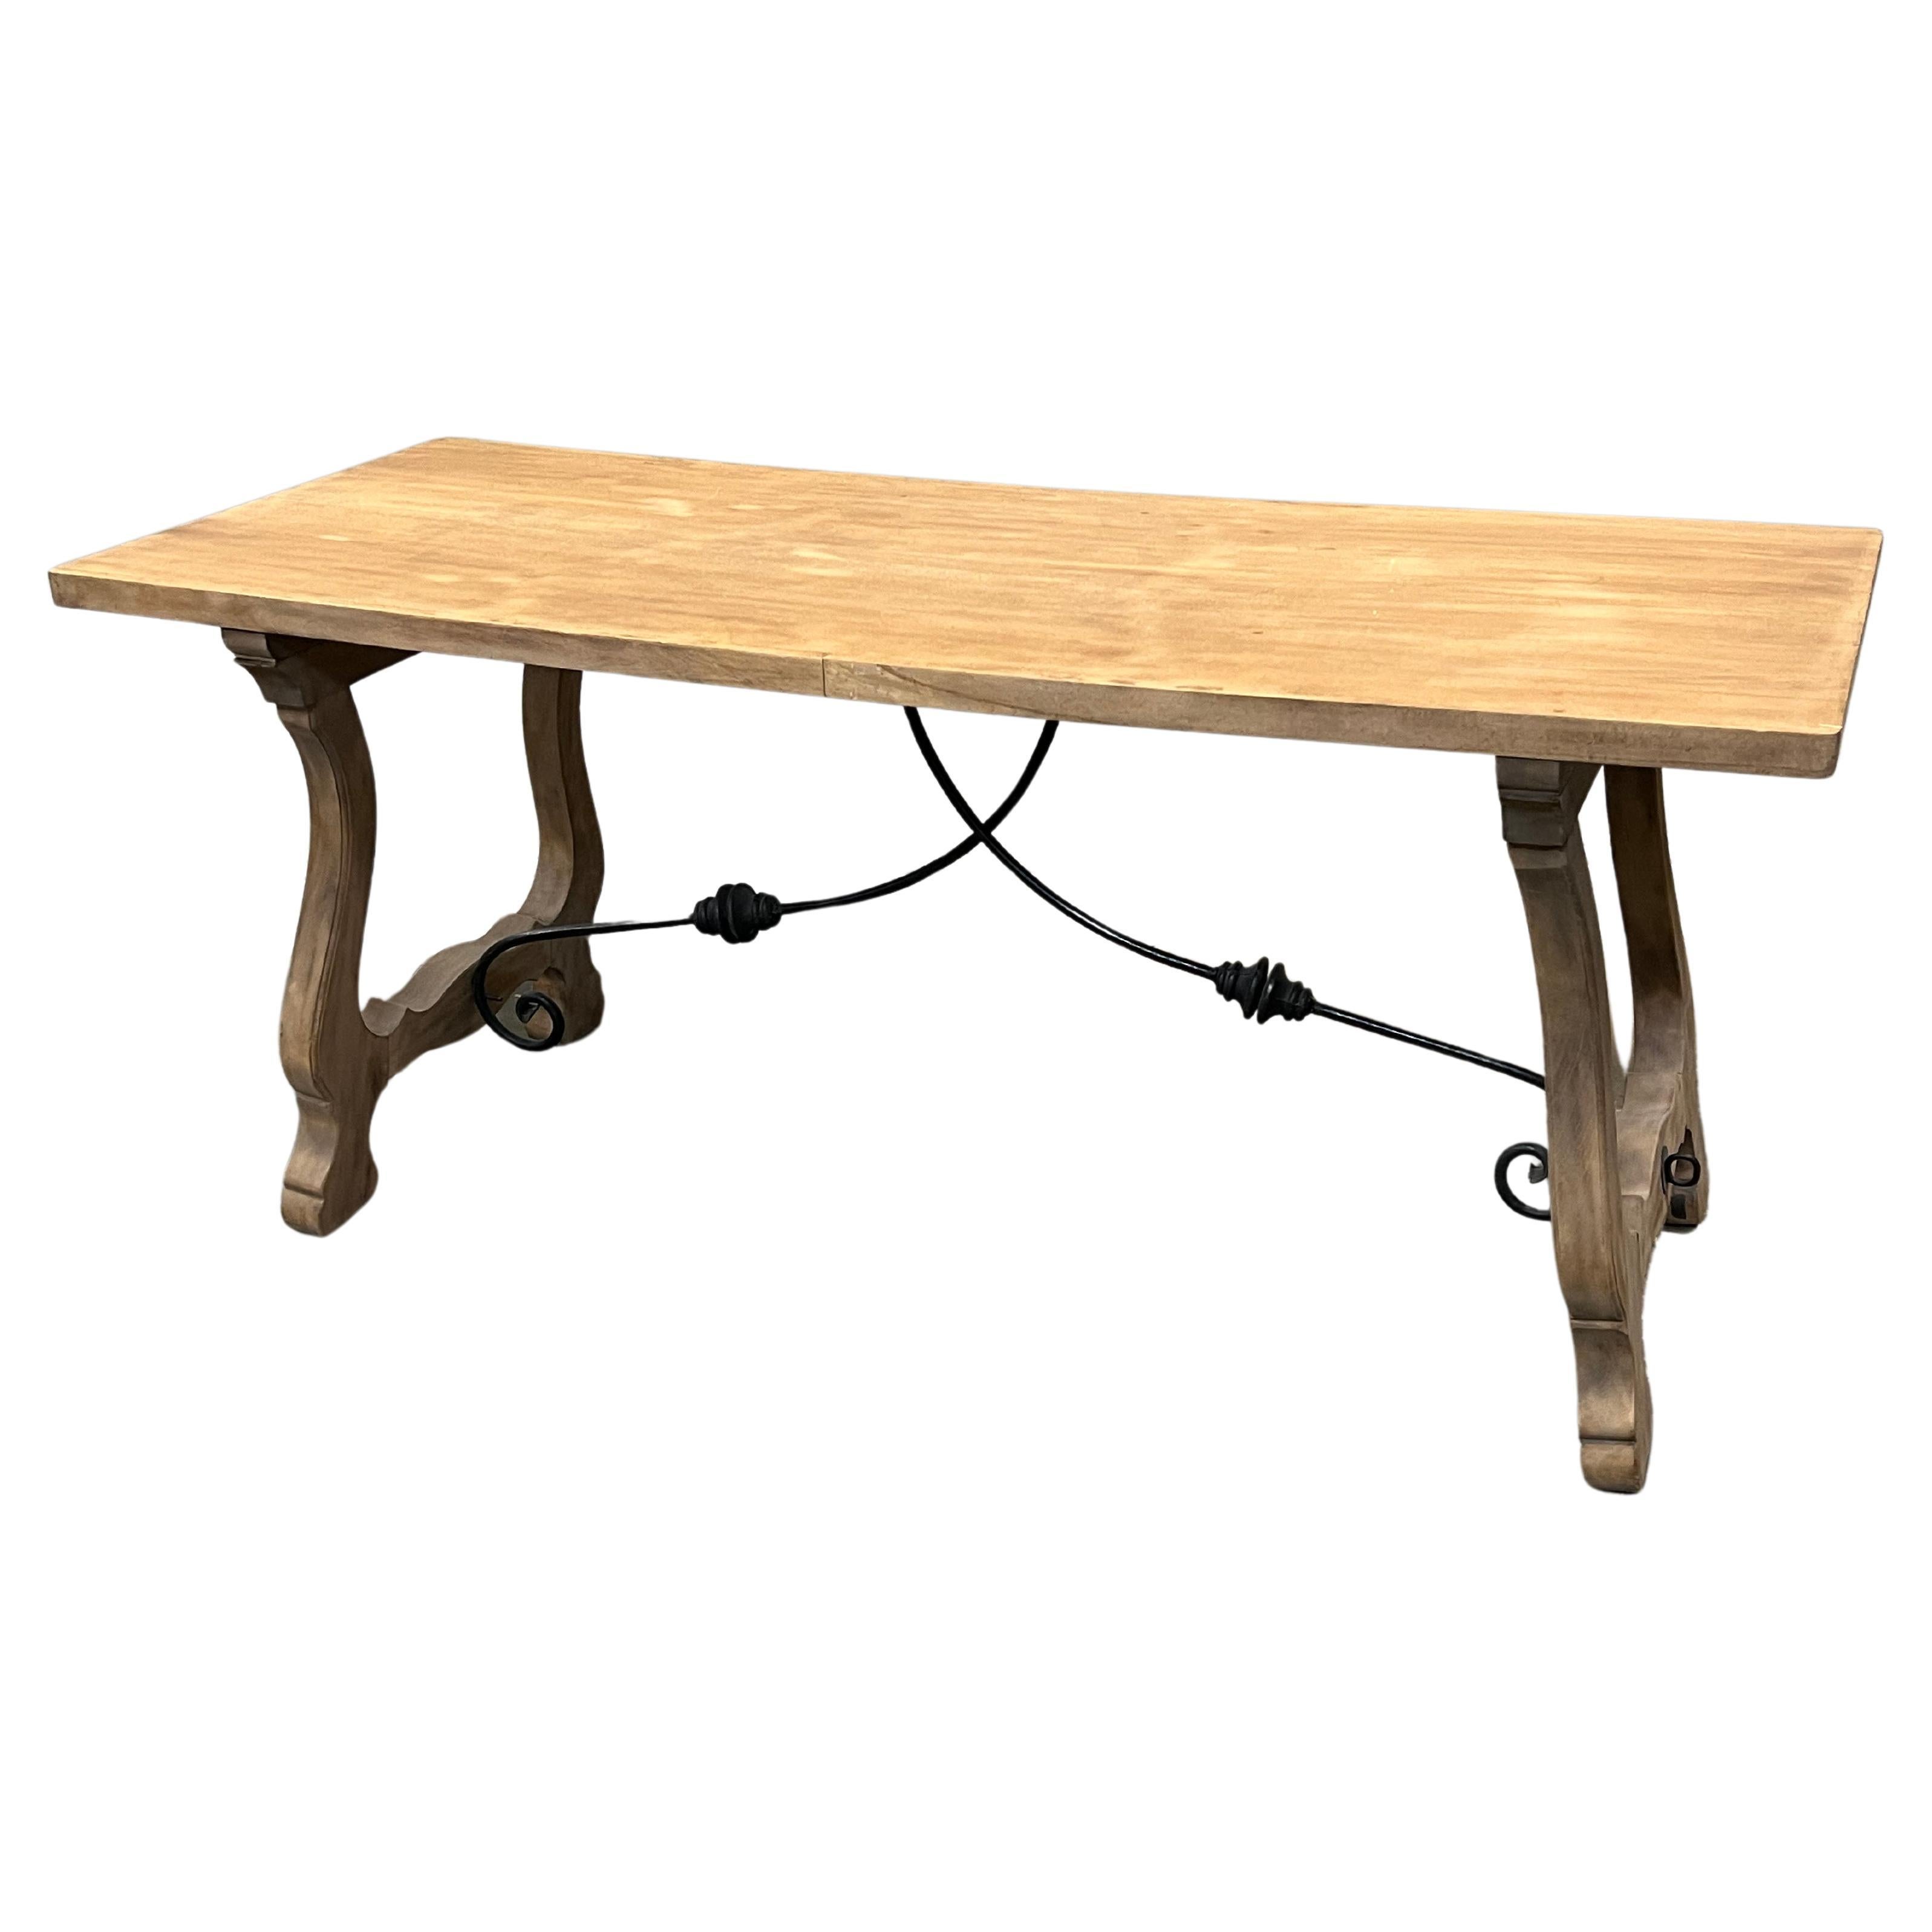 Spanish Style Writing Table With Iron Stretchers For Sale